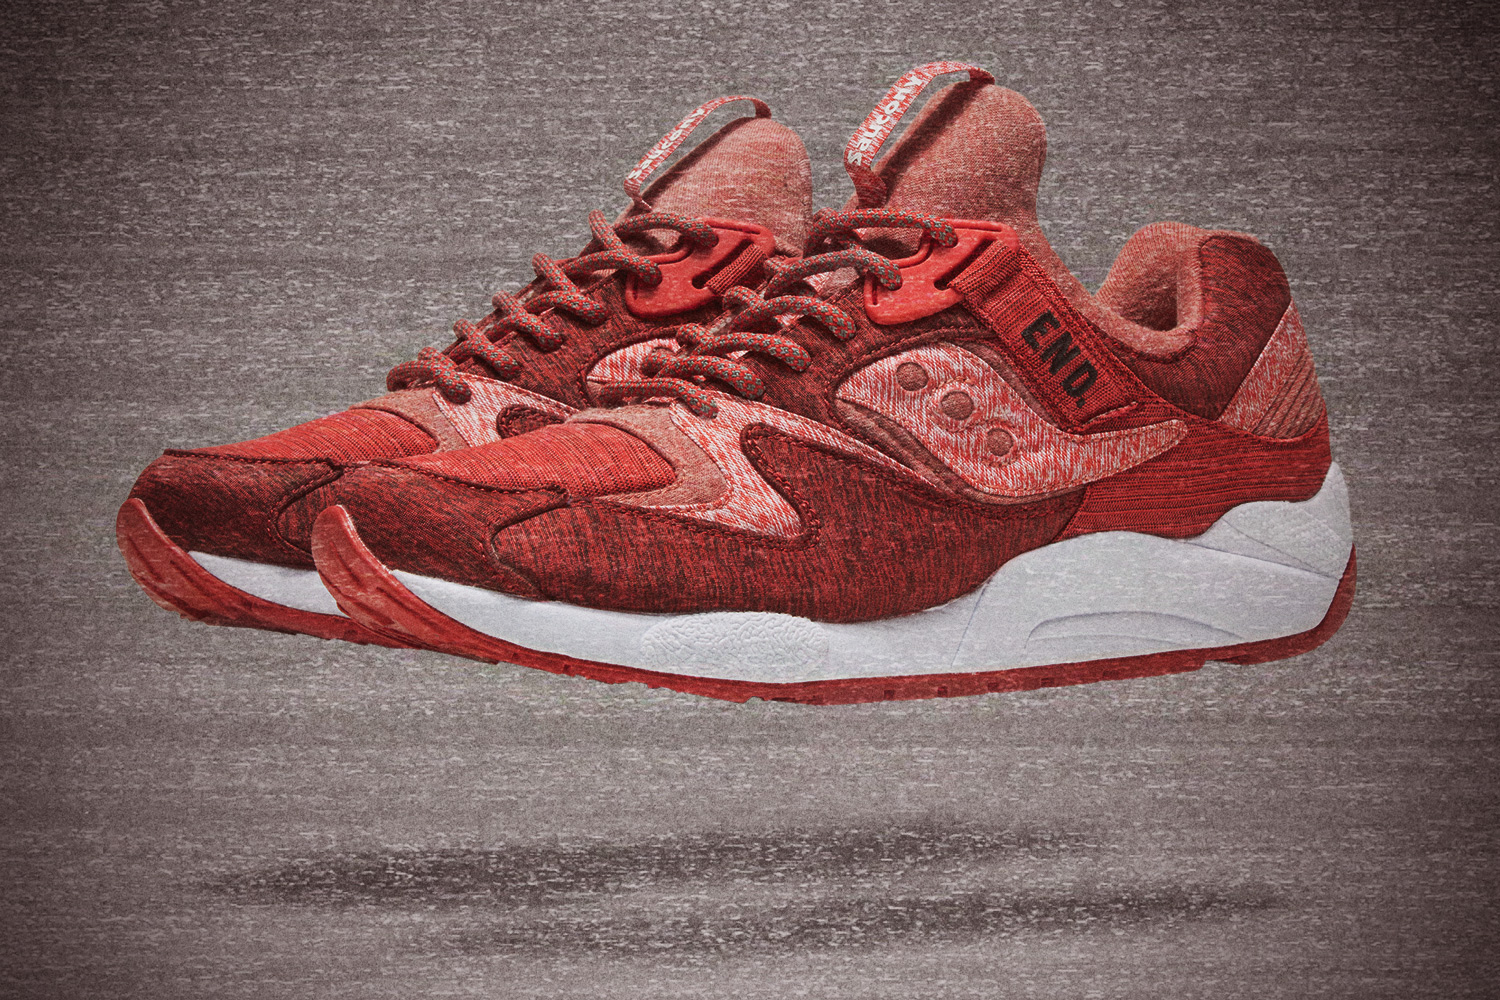 Saucony x END. Grid 9000 “Red Noise”